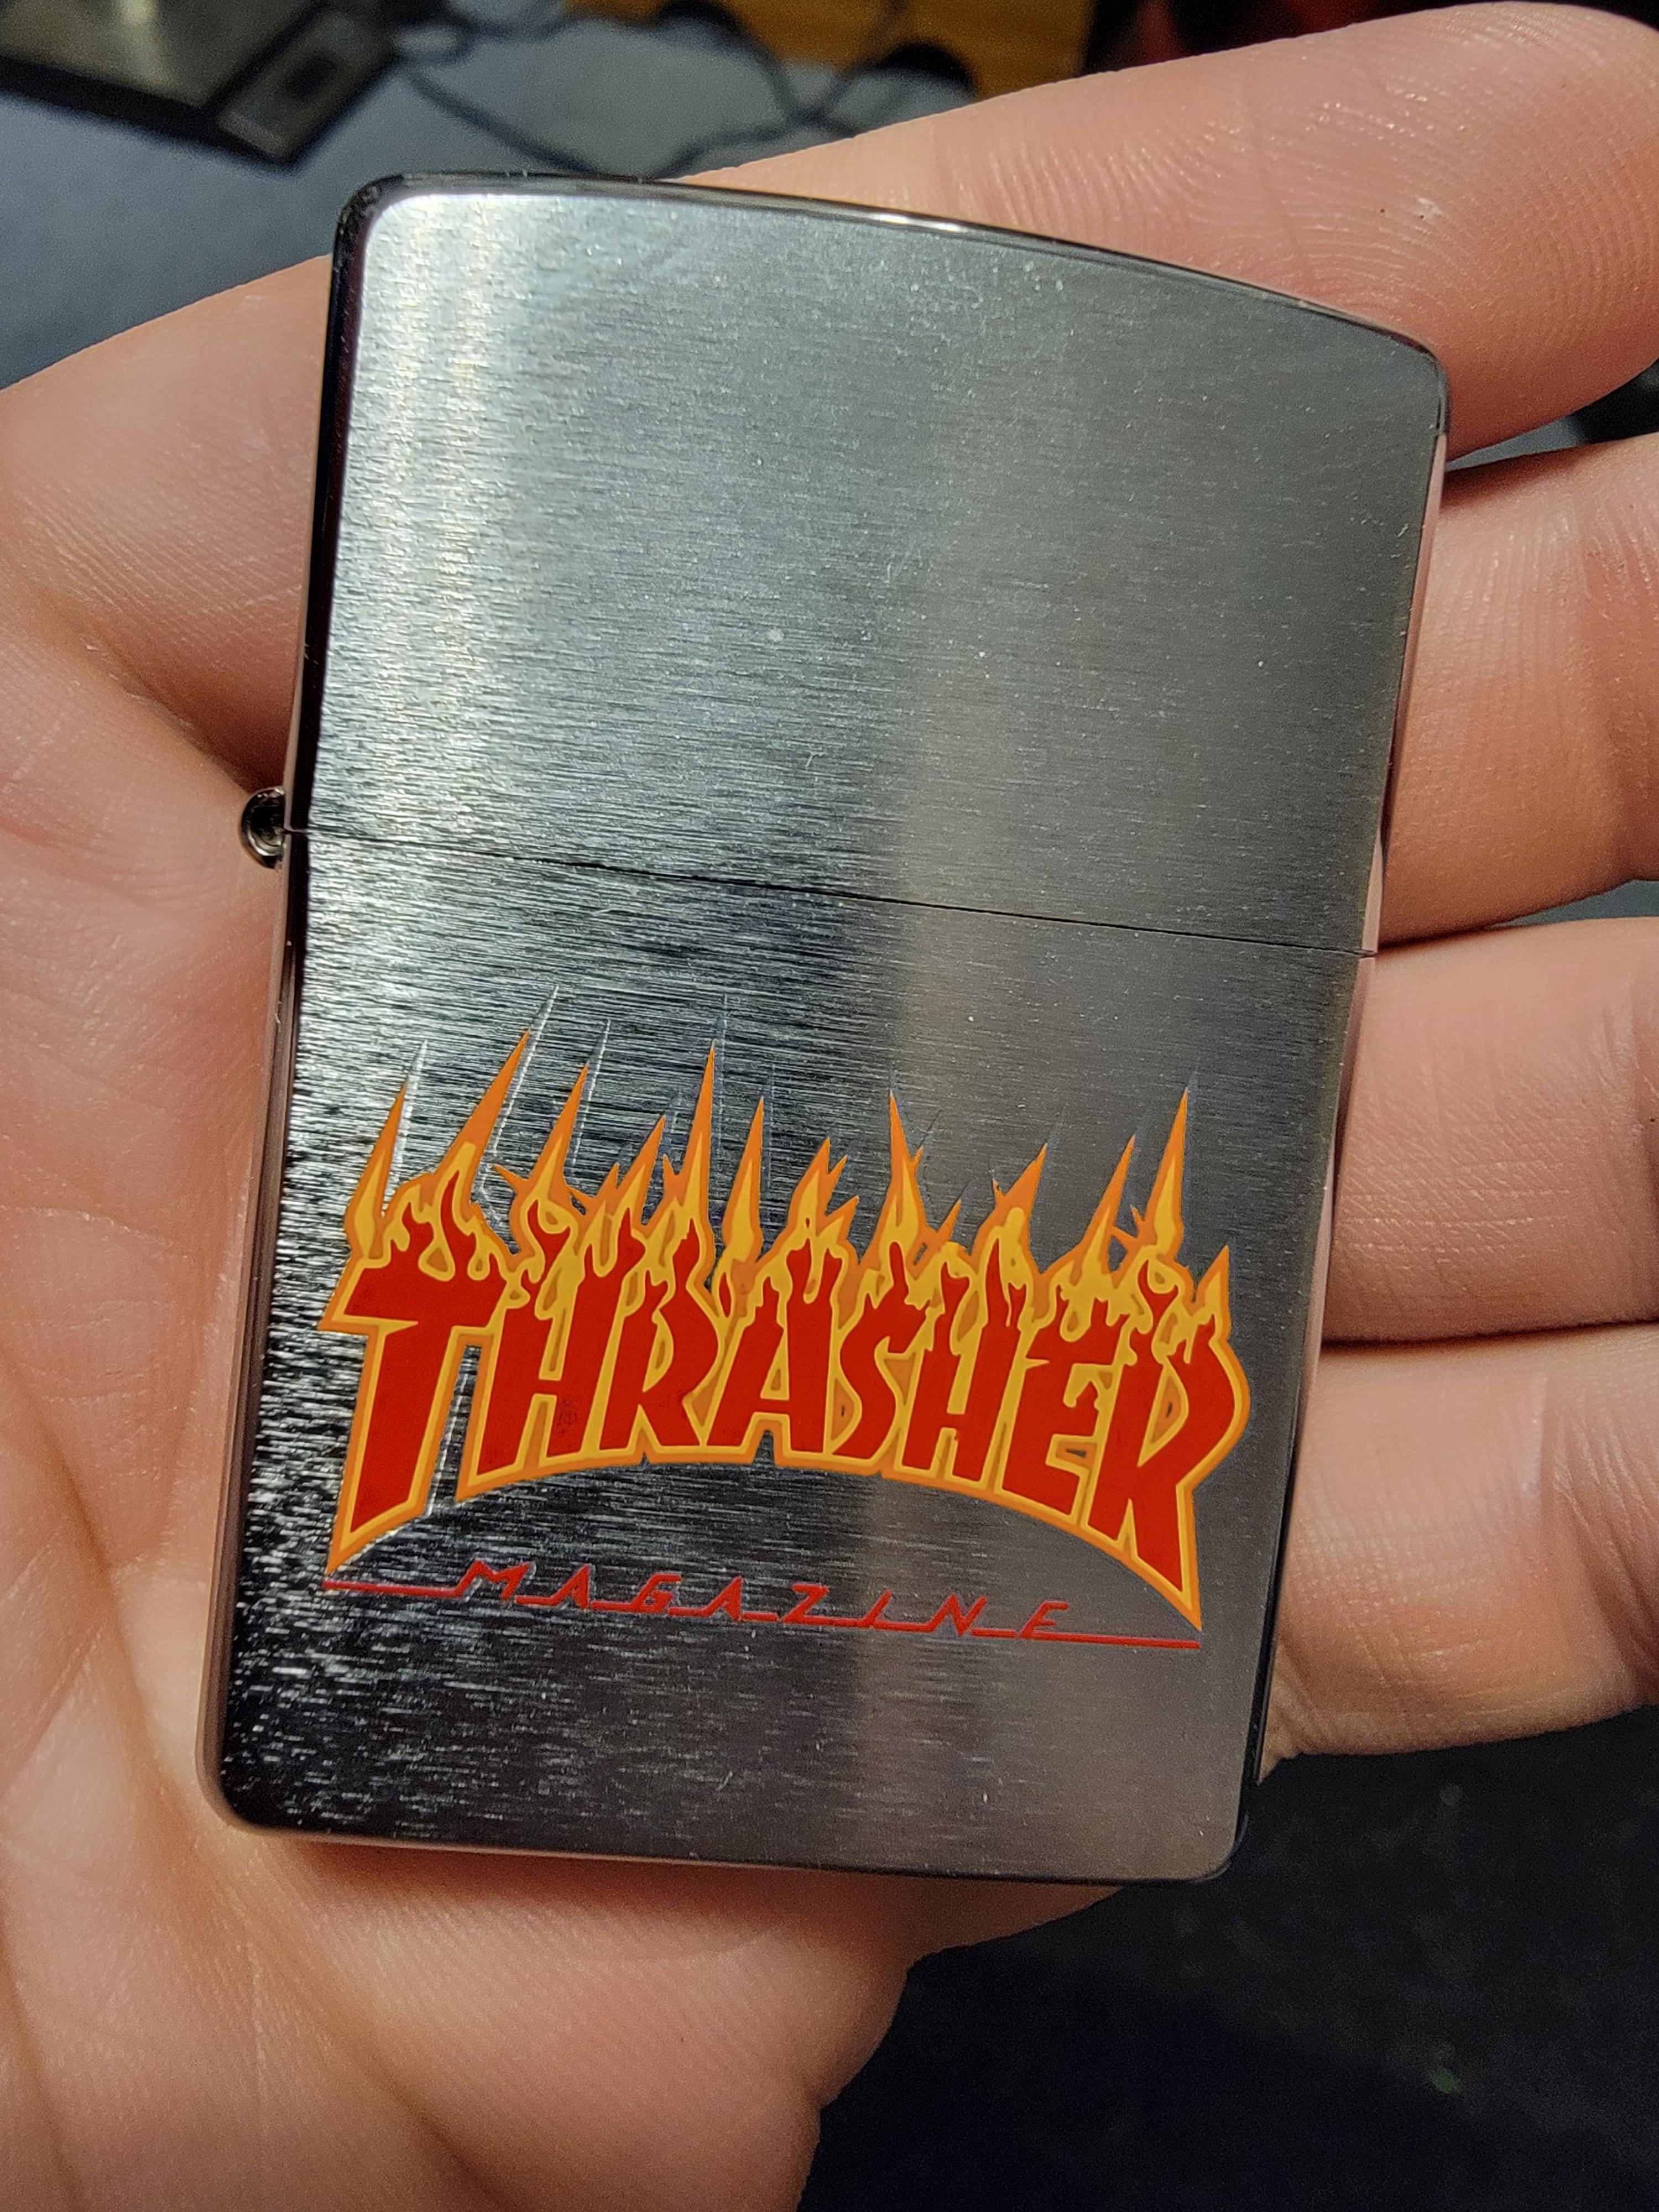 A hand holding a Zippo lighter with the Thrasher magazine logo on it. - Thrasher